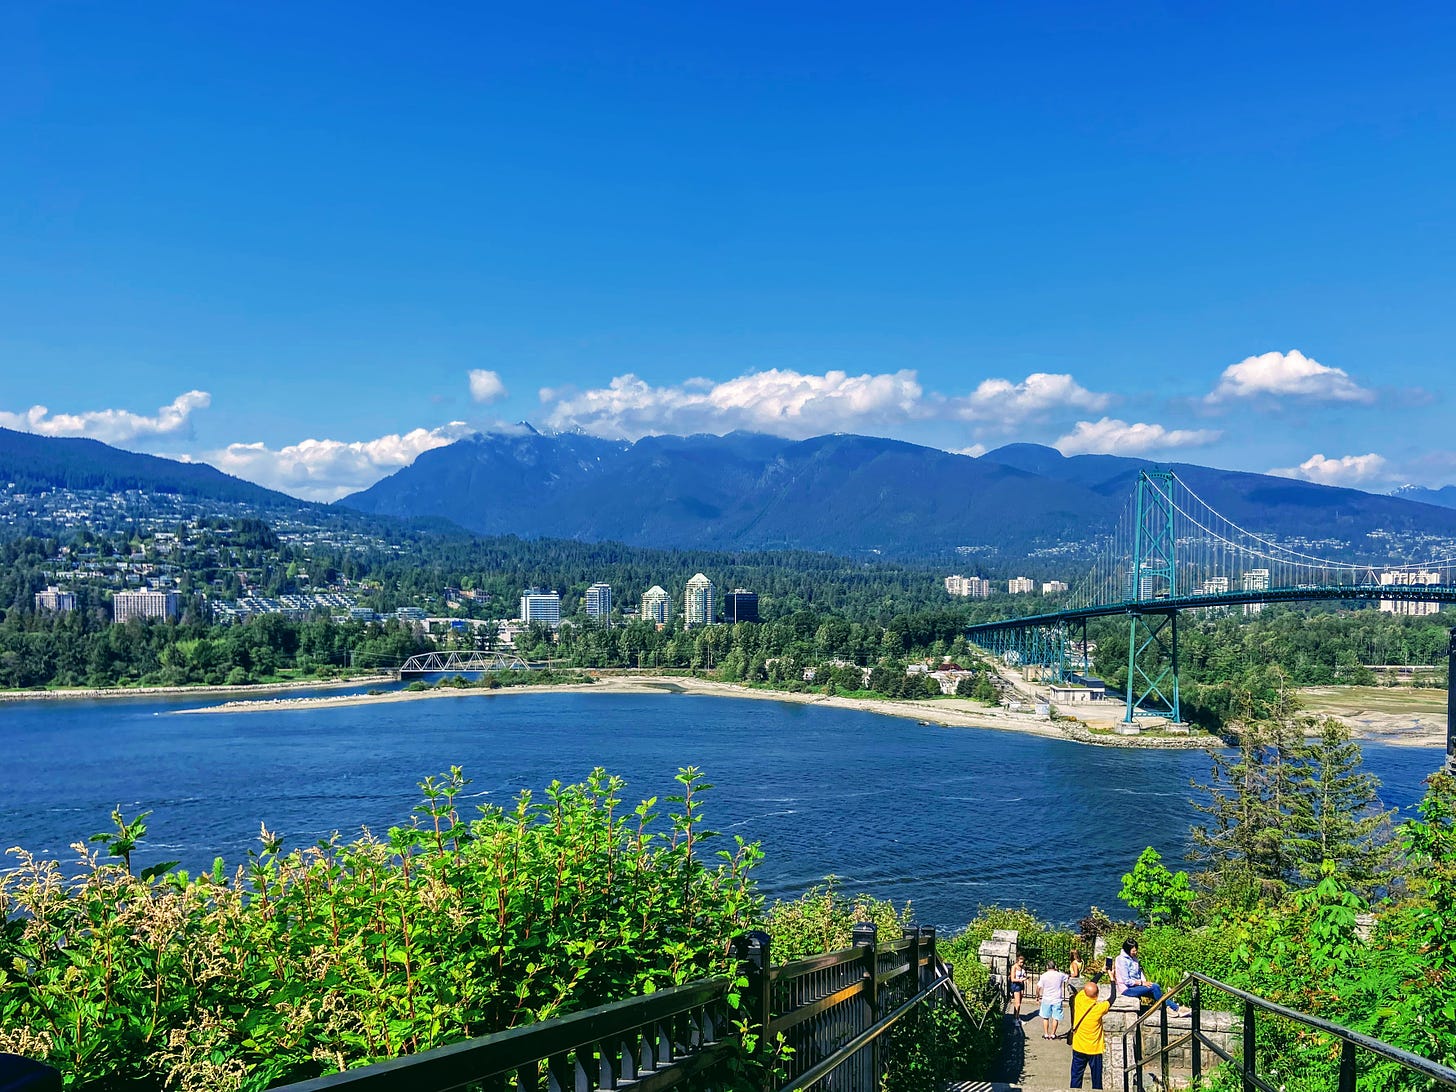 North Vancouver city and trees in foreground with mountains in background